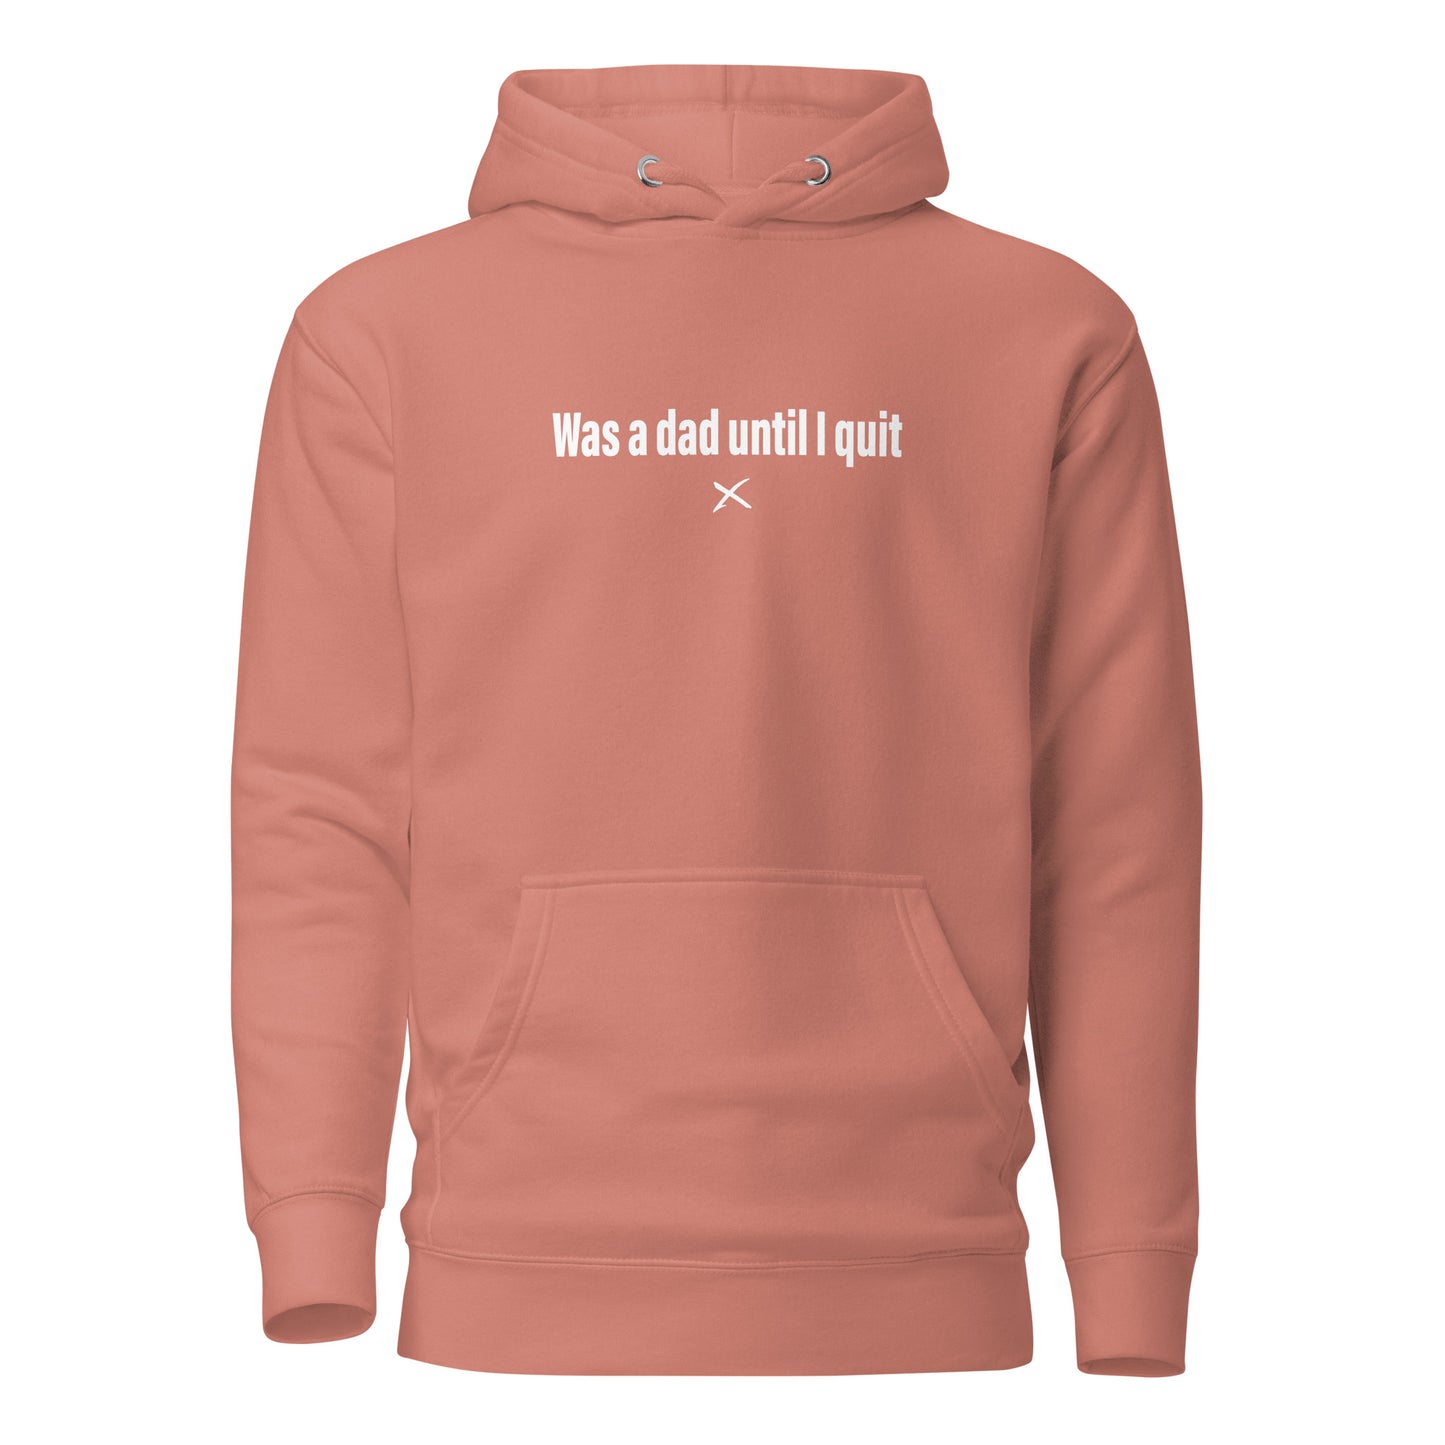 Was a dad until I quit - Hoodie